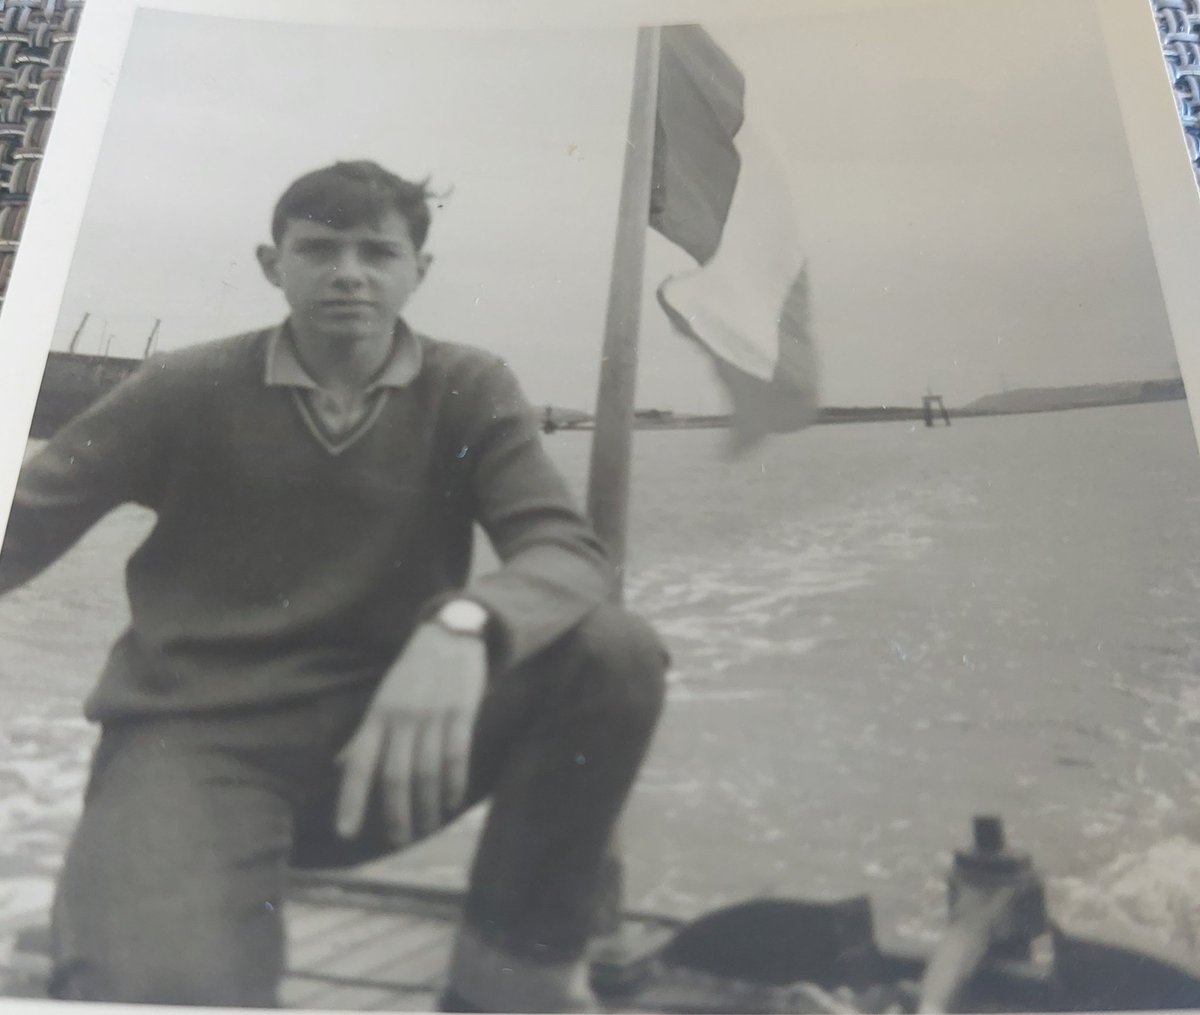 #SpikeIsland Just came across this pix of 15 year old me on the launch to Spike when it was still a Naval base in 1968. 
With my dad we toured the gun emplacements, the underground ammo stores, where I saw torpedoes, depth charges etc, and we visited the Officer's Mess.